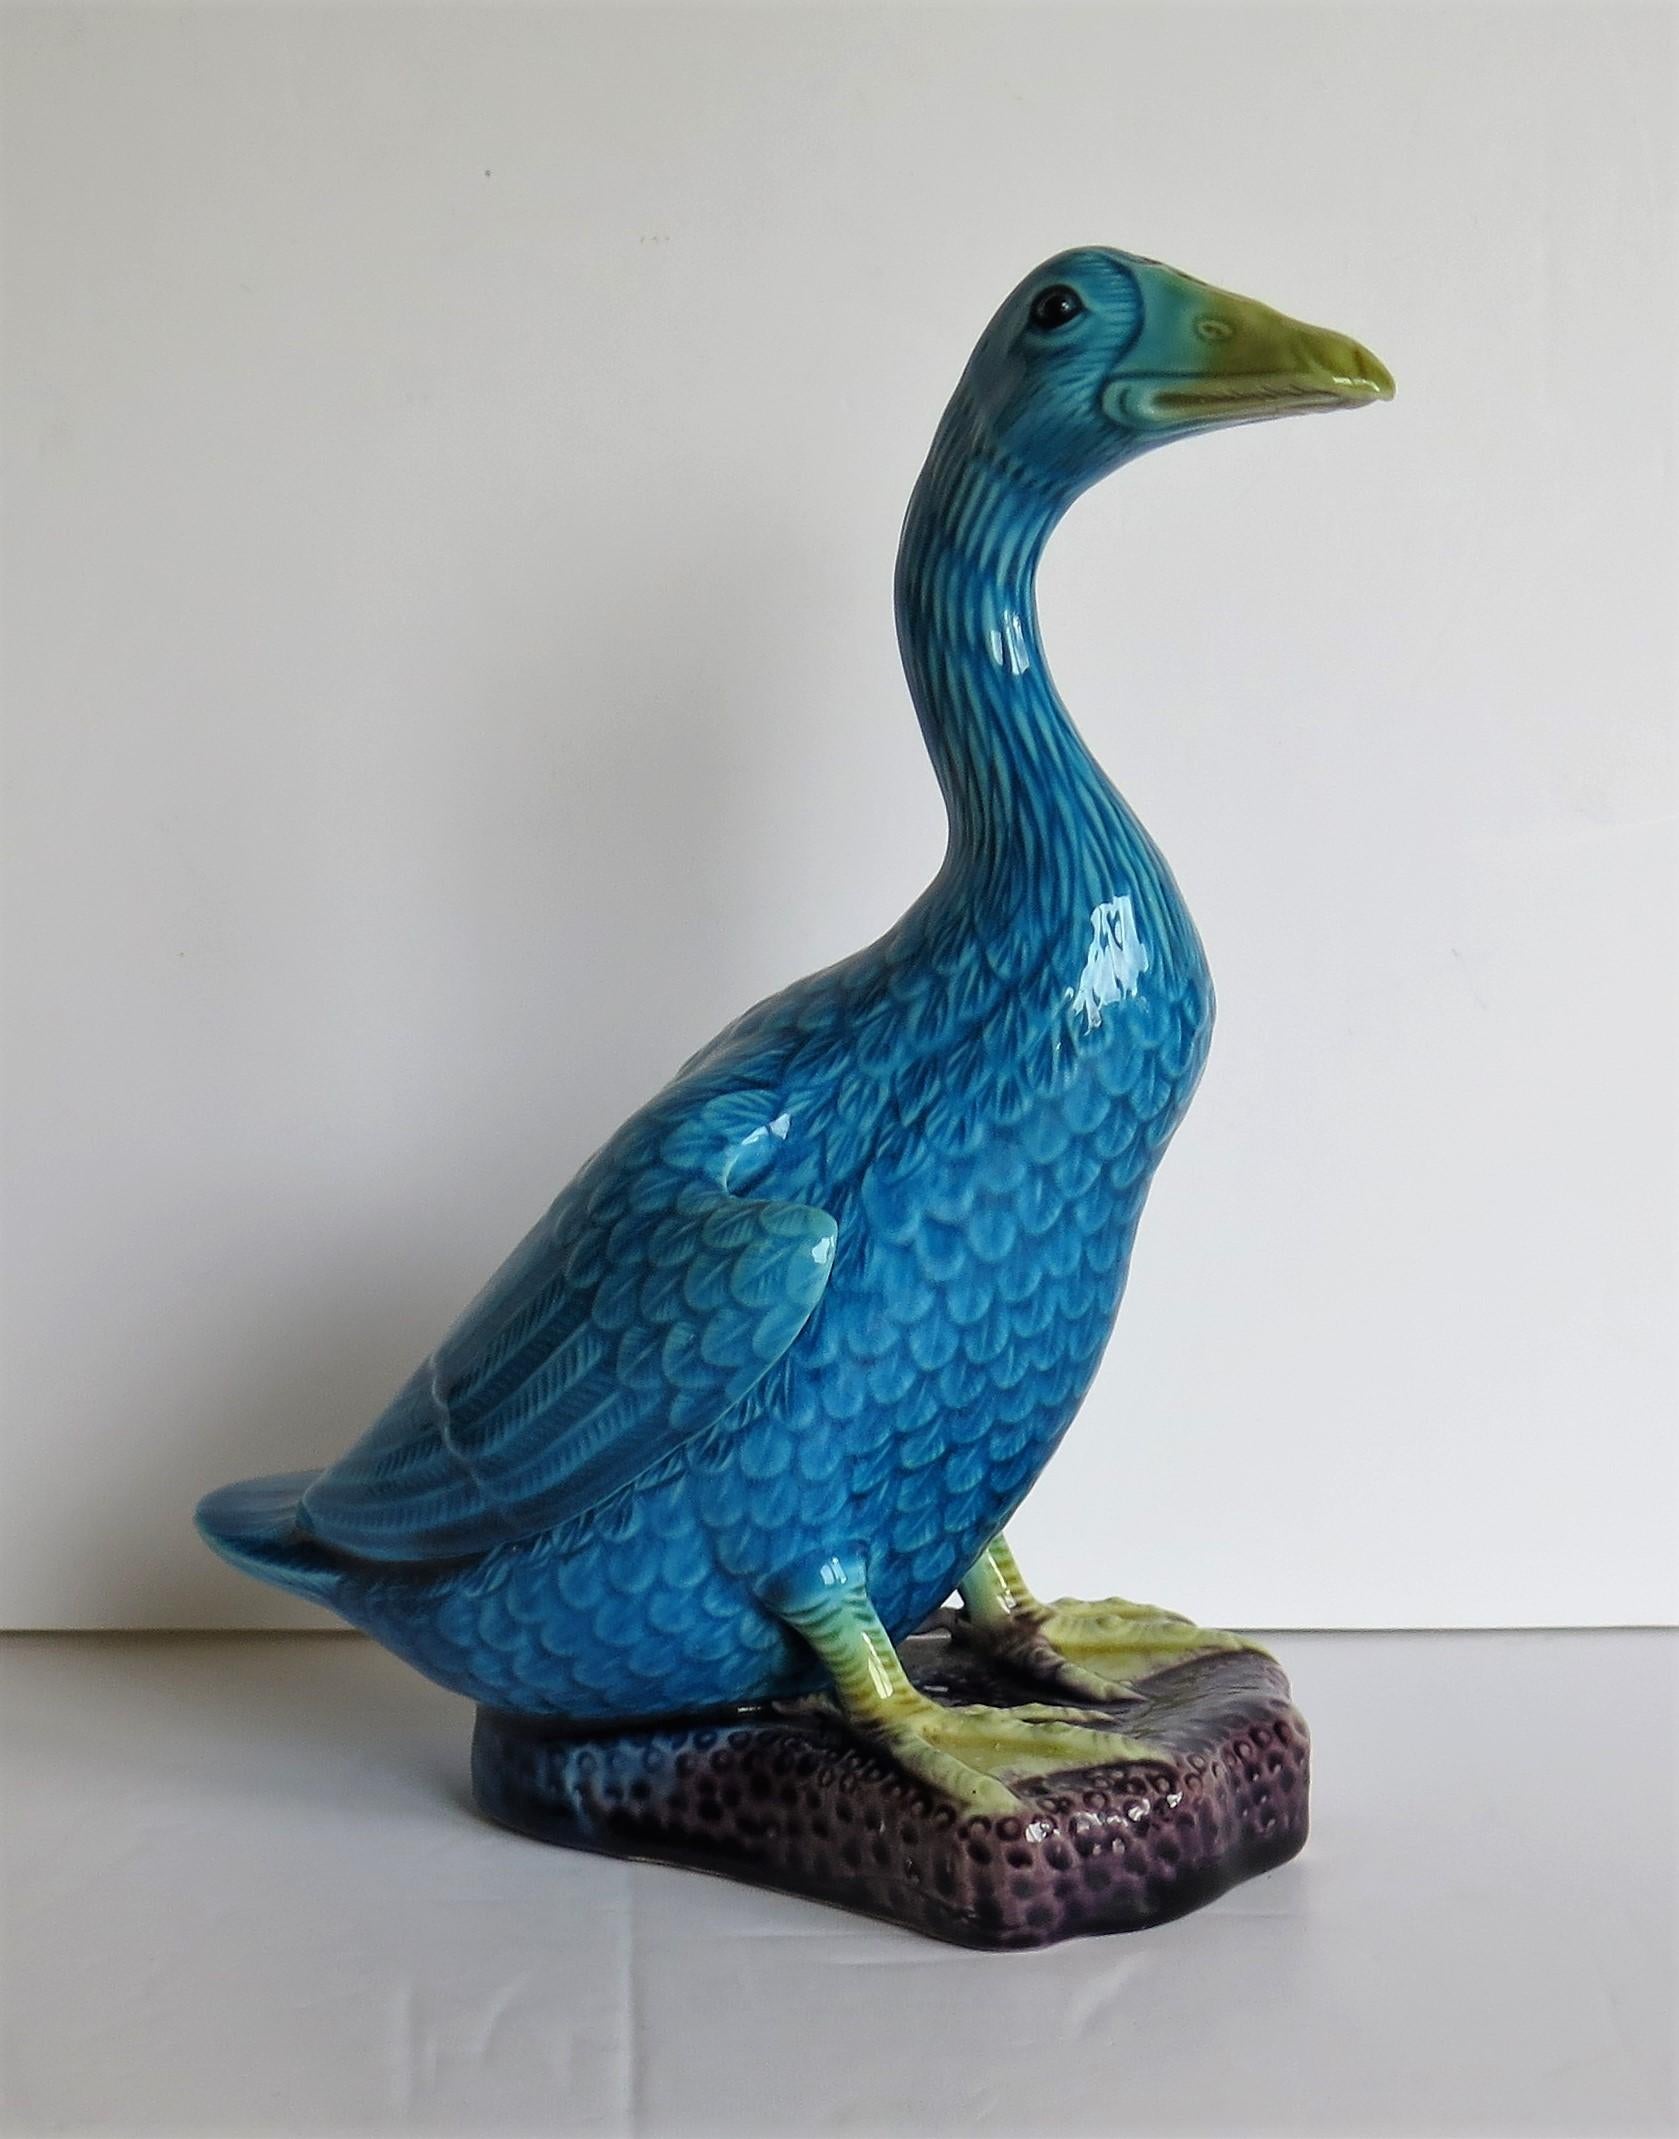 Glazed Chinese Export Porcelain Goose Bird Figurine in Polychrome Enamels, Ca 1930